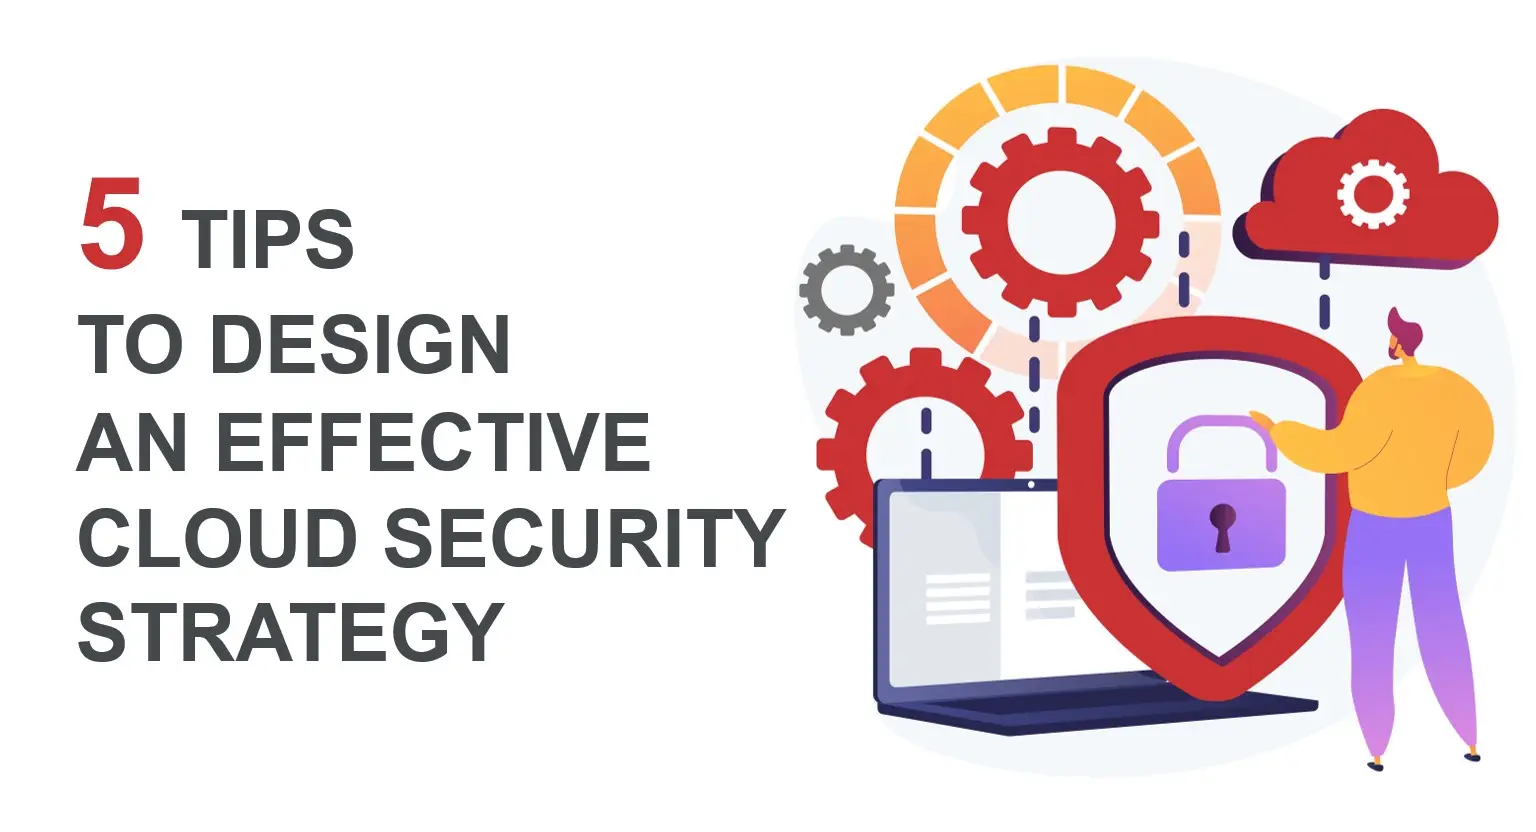 5 Tips to design an effective cloud security strategy